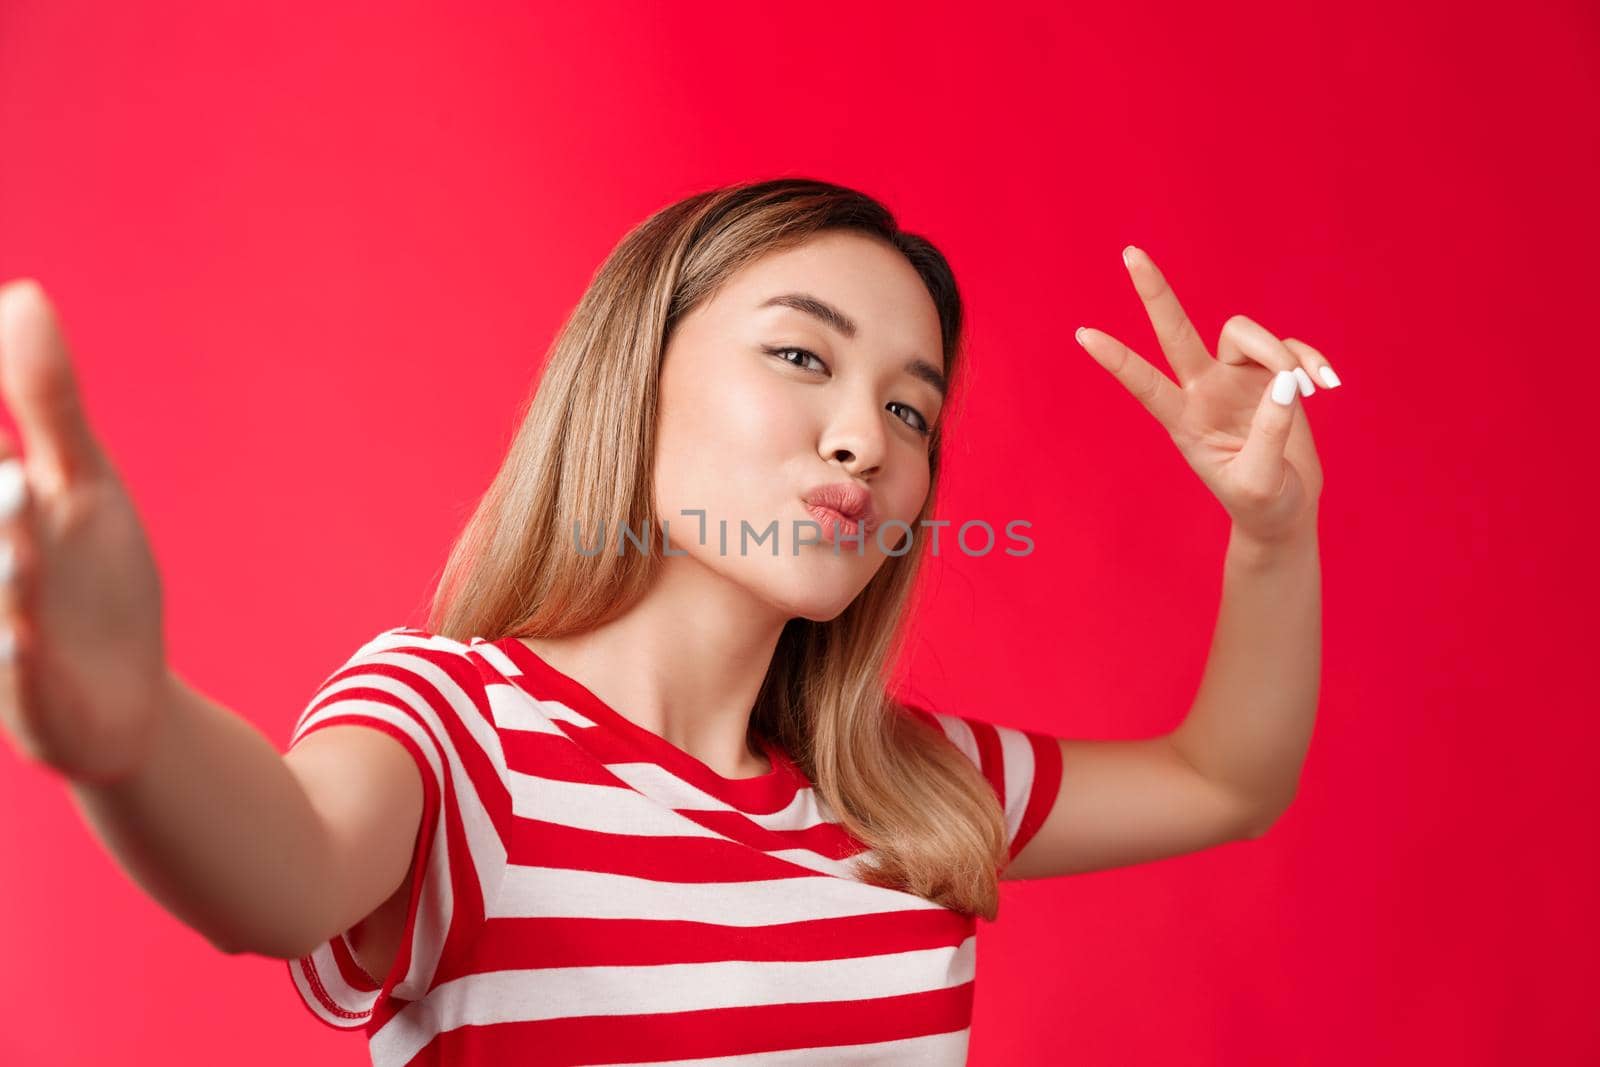 Close-up friendly outgoing cute asian girl blond hairstyle taking photograph, hold smartphone fold lips silly kiss expression, show peace victory sign, make selfie smartphone red background.